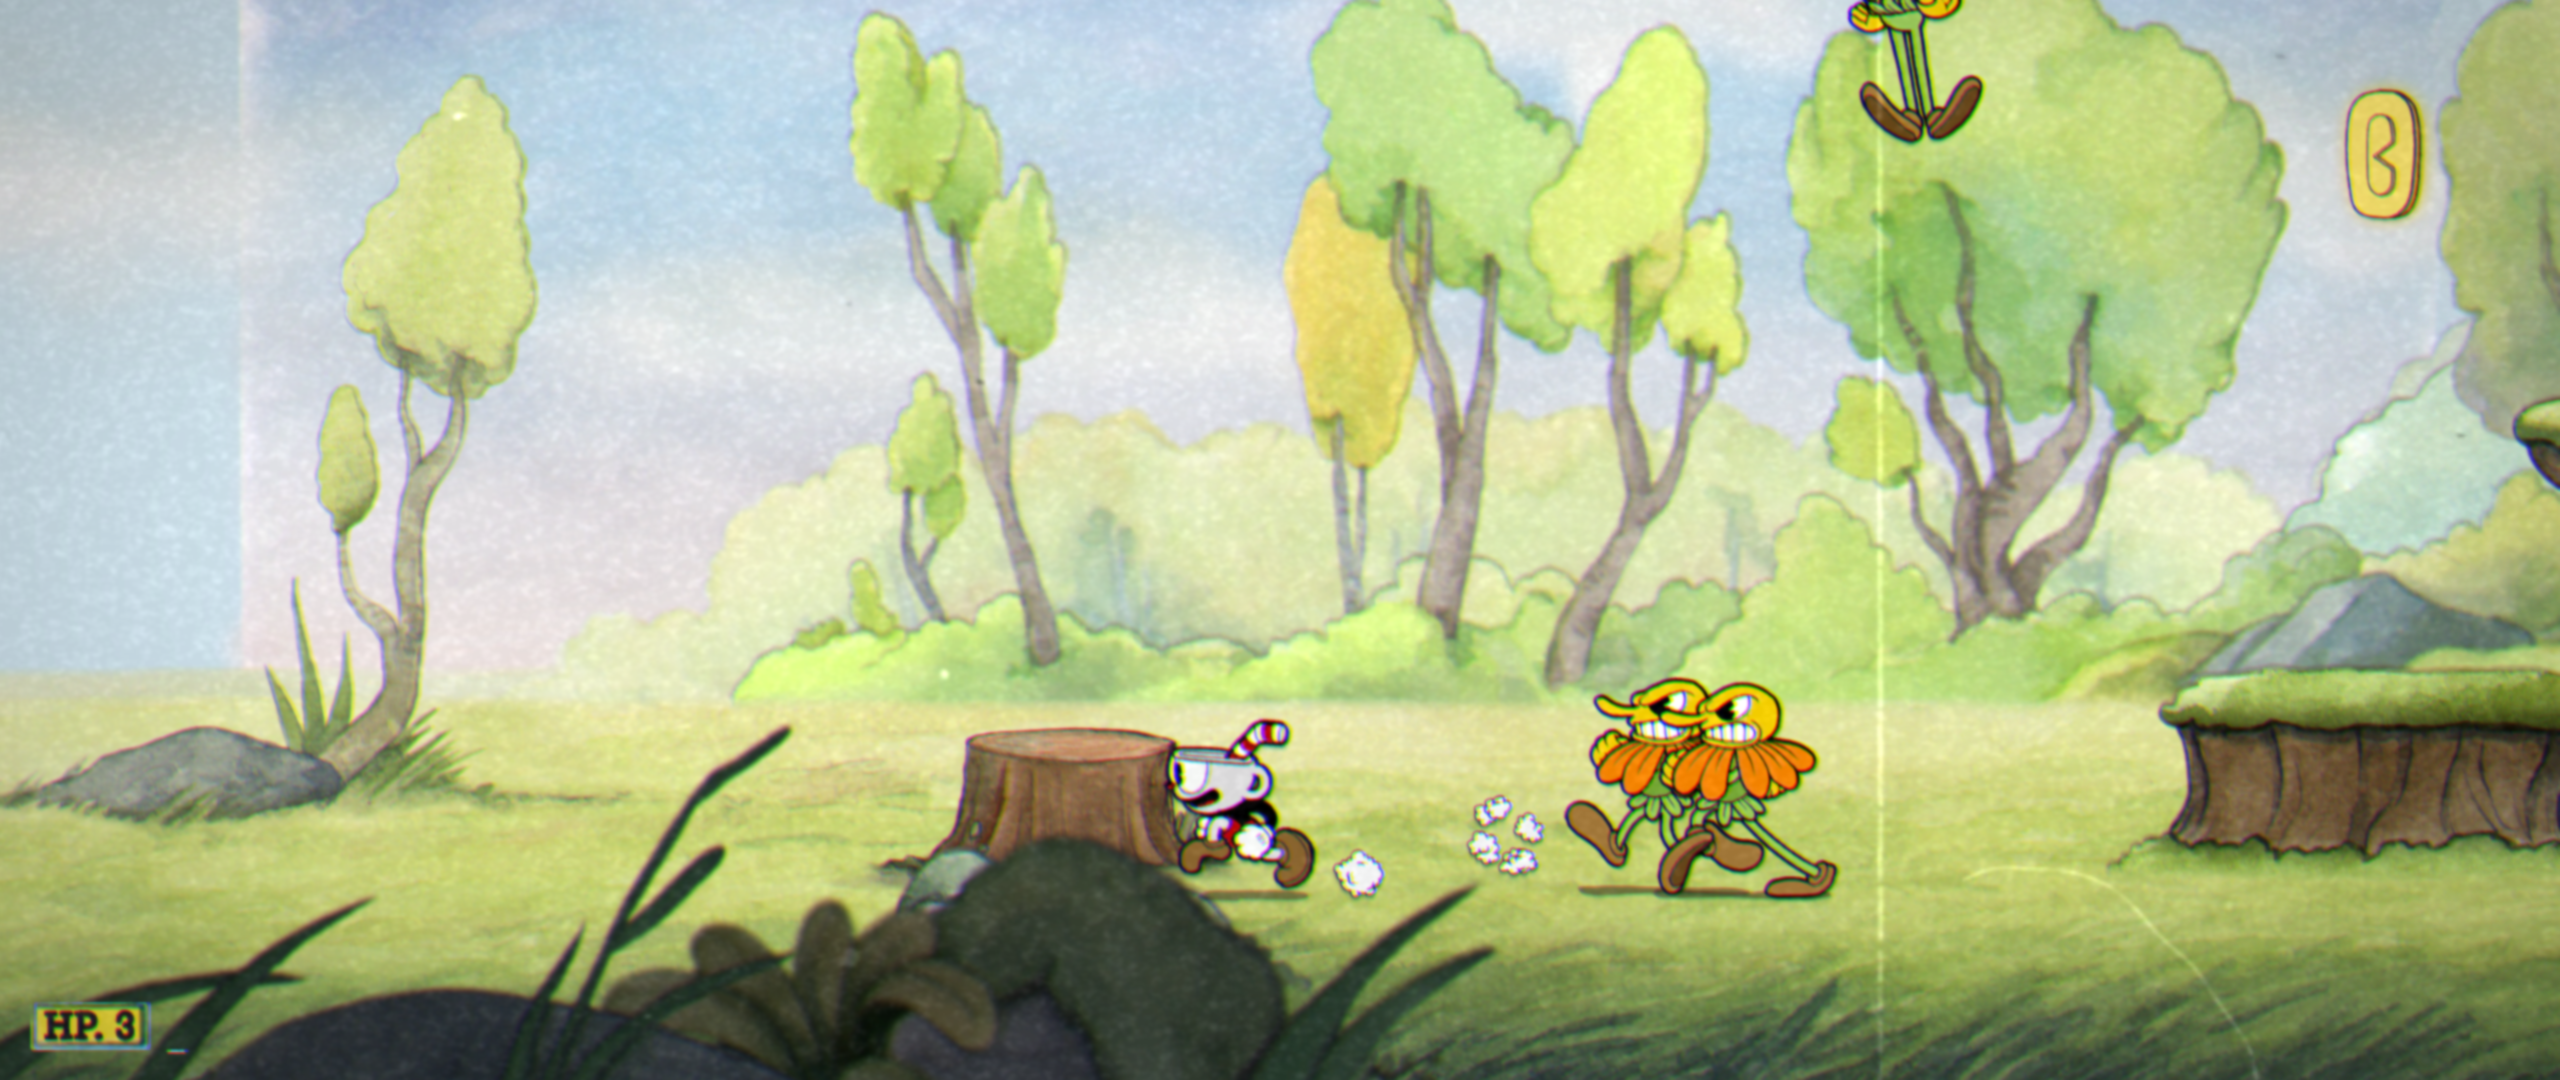 Cuphead_2017_09_29_21_16_56_144.png